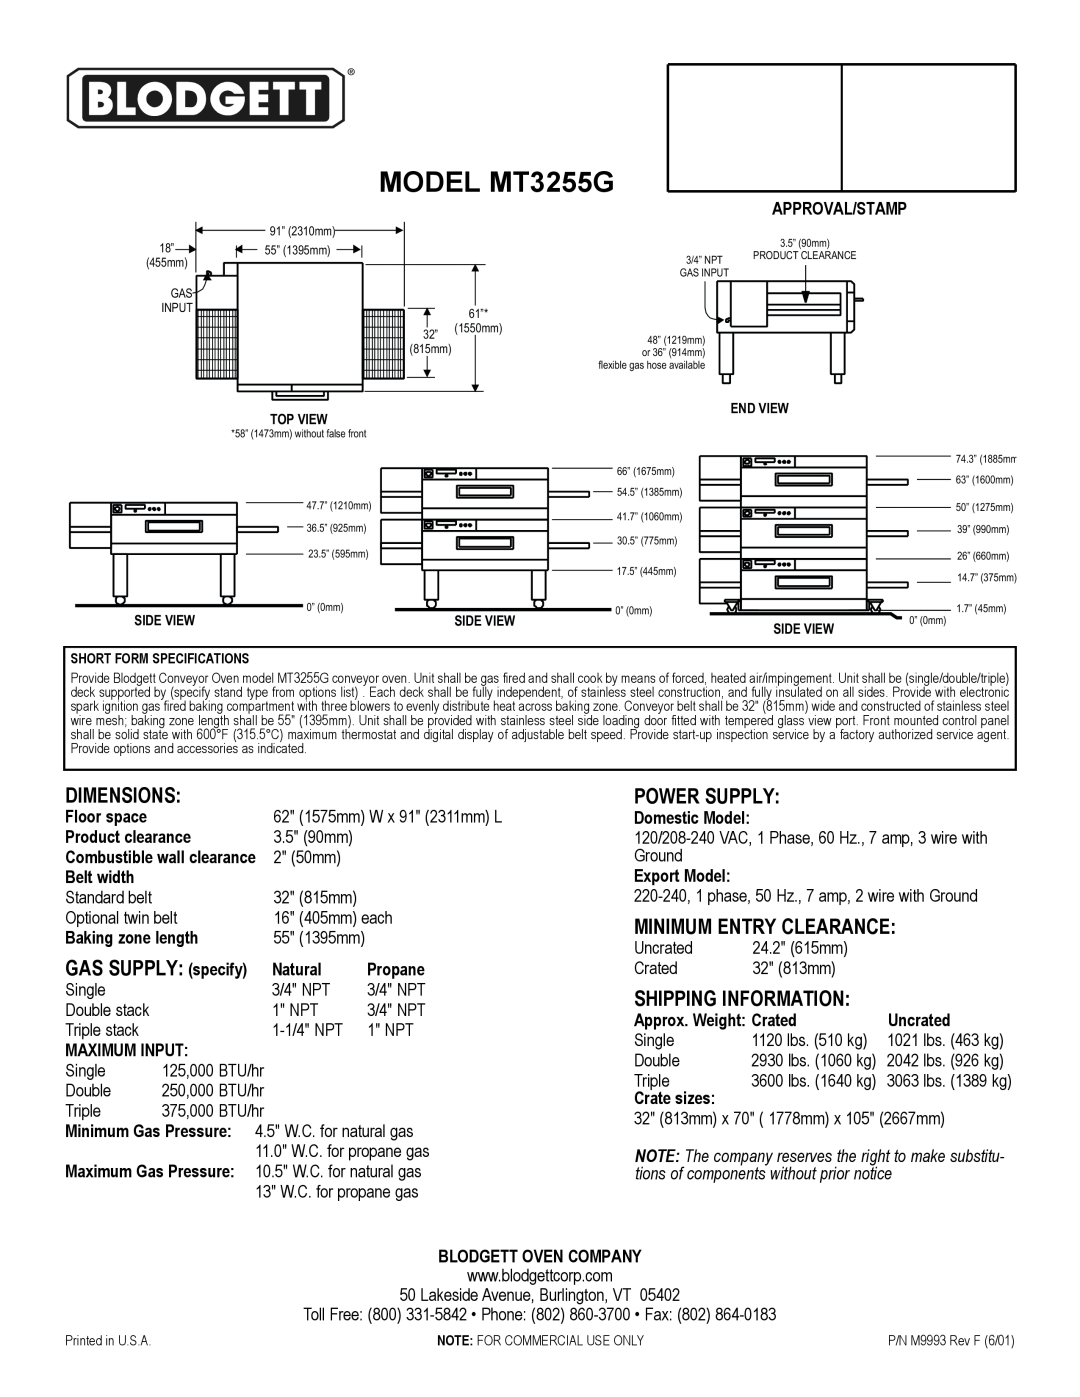 Blodgett MT3255G warranty Dimensions, Power Supply, Minimum Entry Clearance, tions of components without prior notice 